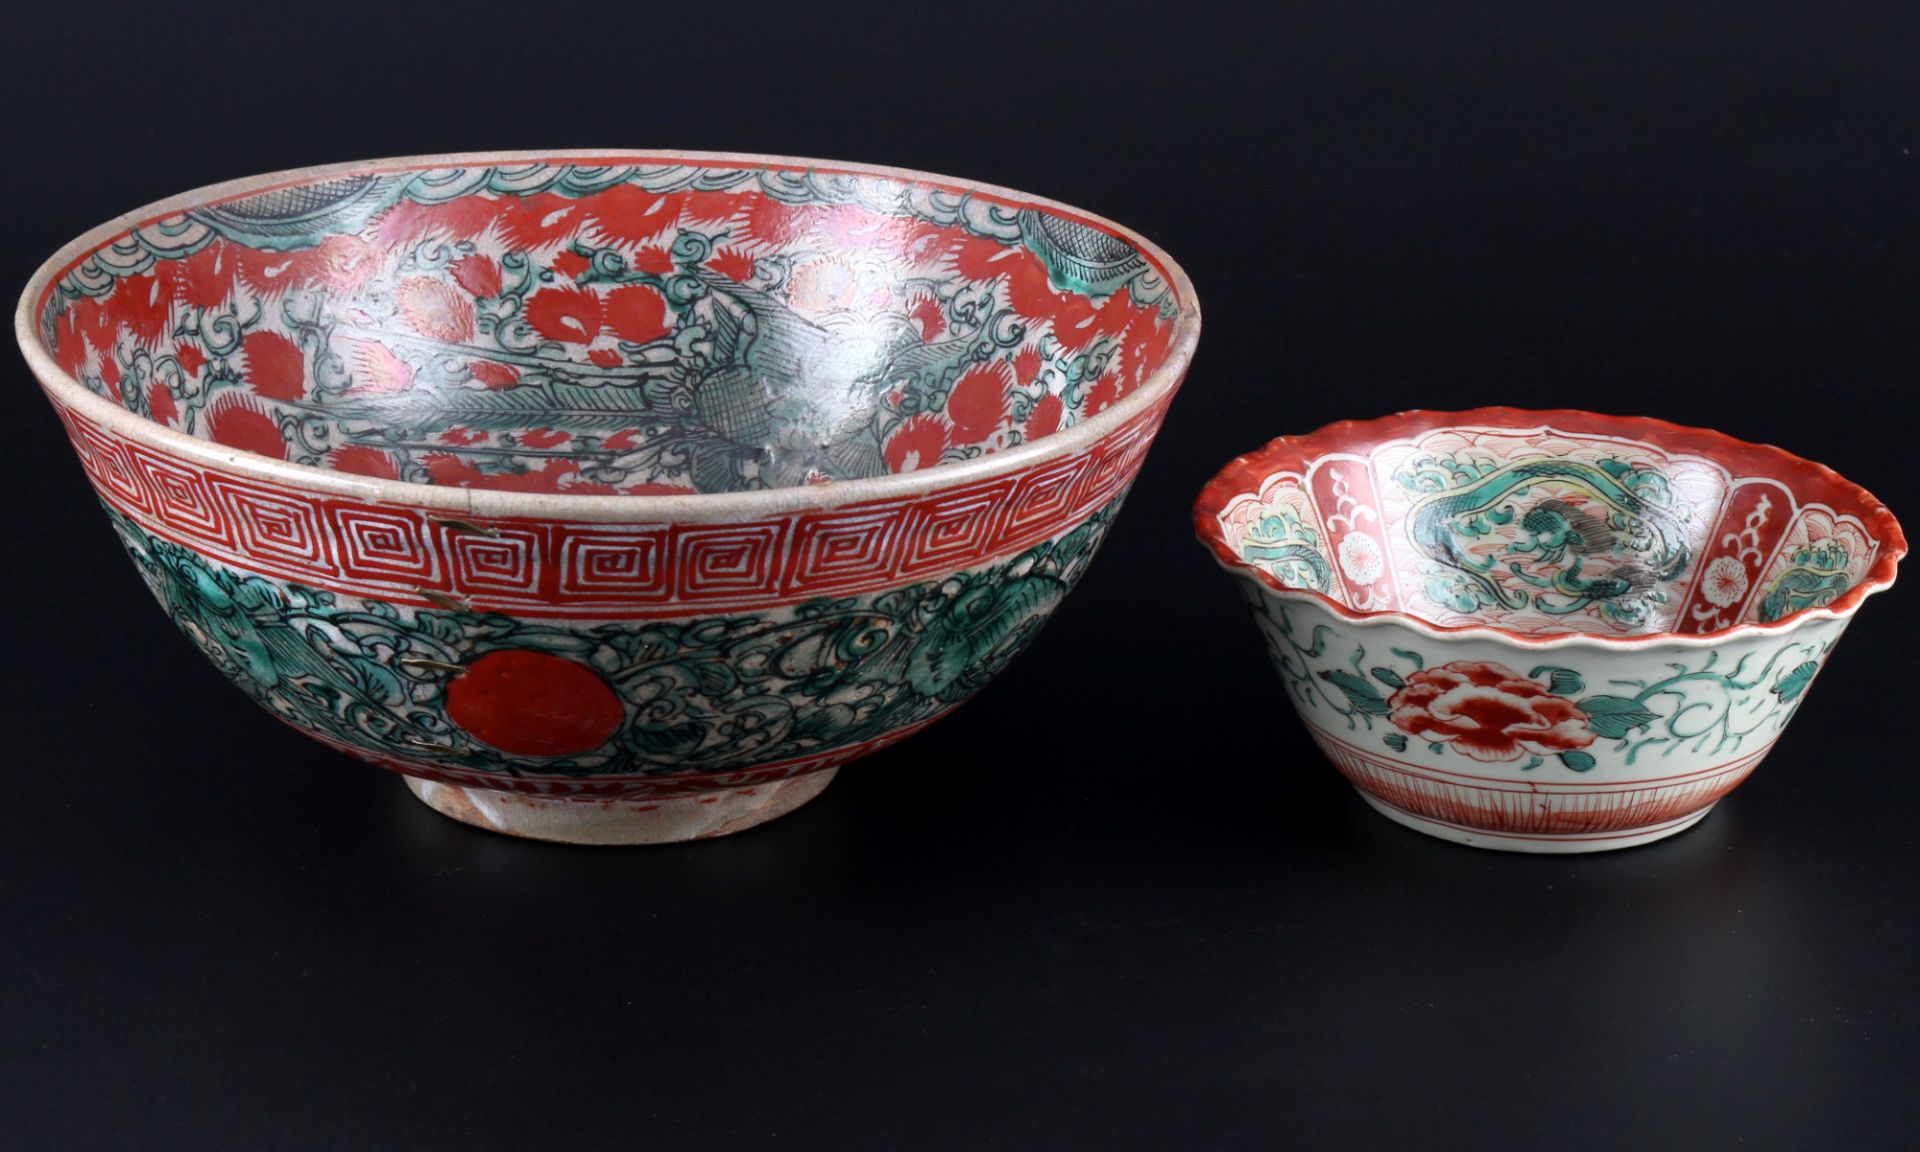 Chinese two Swatow porcelain bowls early Qing dynasty, China Swatow Porzellanschalen